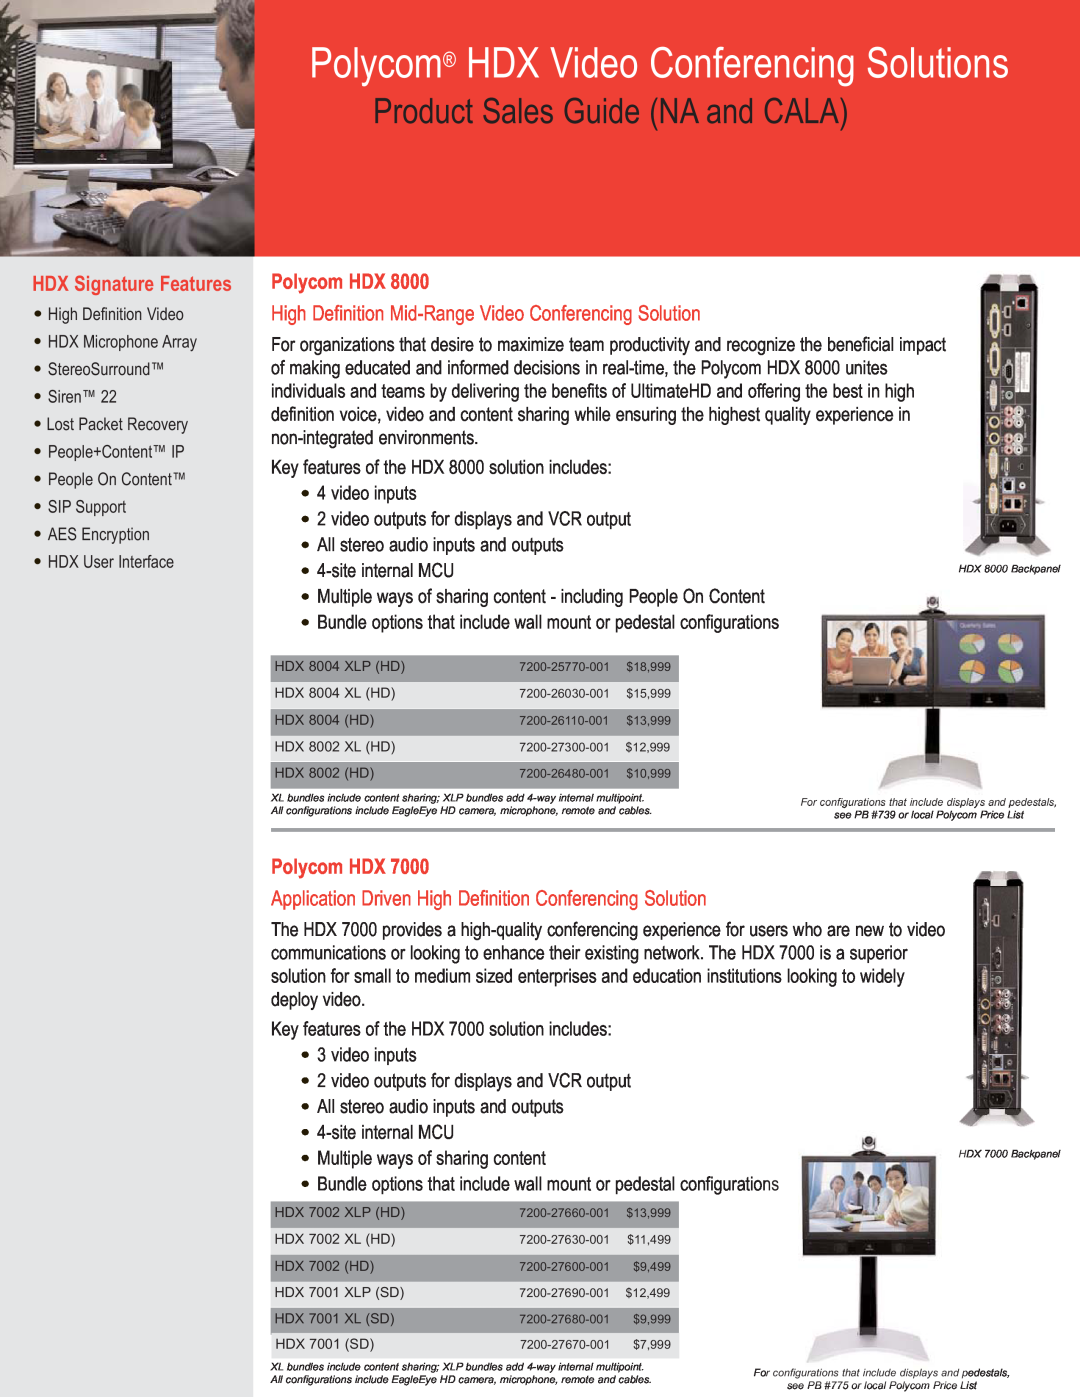 Polycom HDX 9000 Polycom HDX, High Definition Mid-Range Video Conferencing Solution, Product Sales Guide NA and CALA 